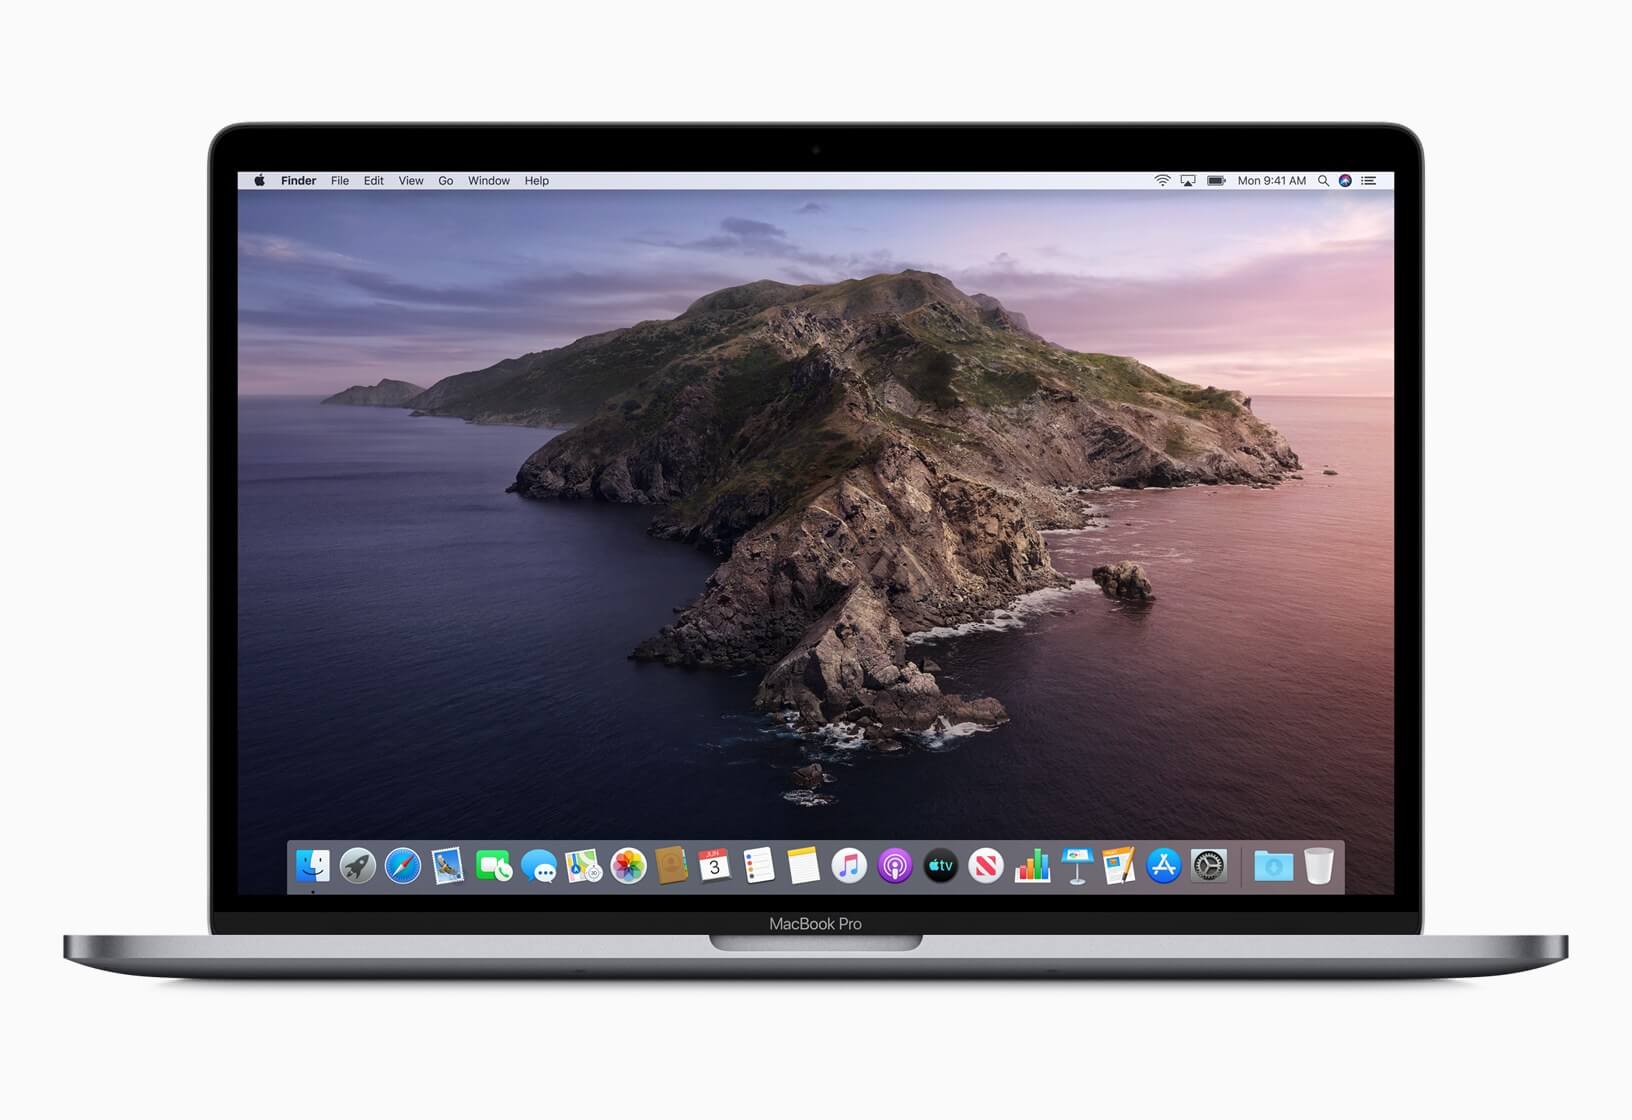 Apple's macOS Catalina update is now available for download